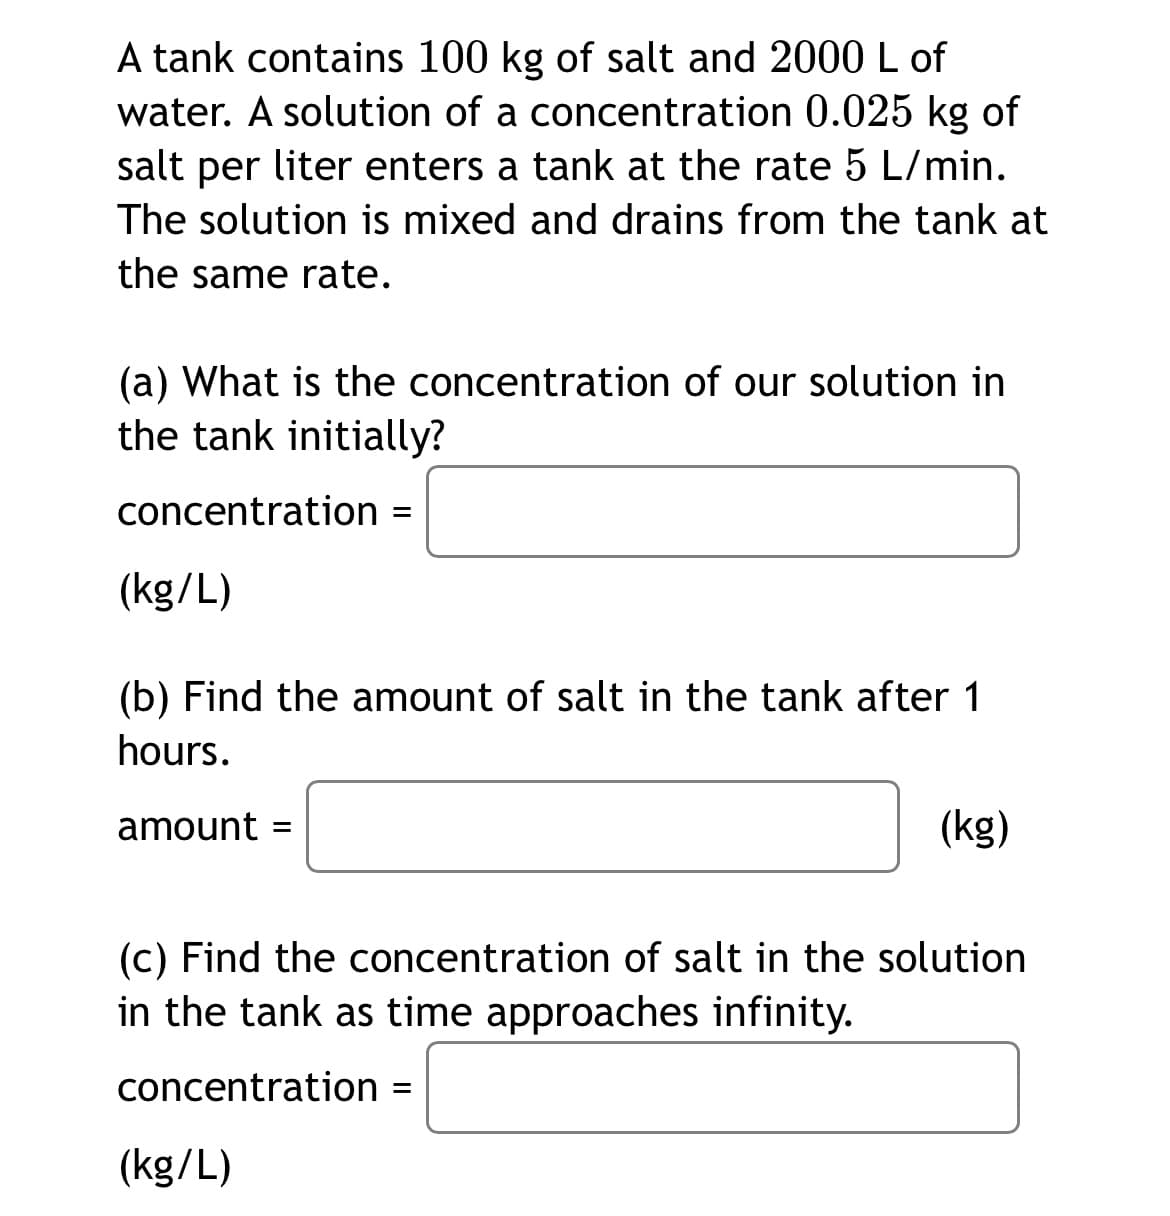 A tank contains 100 kg of salt and 2000 L of
water. A solution of a concentration 0.025 kg of
salt per liter enters a tank at the rate 5 L/min.
The solution is mixed and drains from the tank at
the same rate.
(a) What is the concentration of our solution in
the tank initially?
concentration
(kg/L)
(b) Find the amount of salt in the tank after 1
hours.
amount =
(kg)
(c) Find the concentration of salt in the solution
in the tank as time approaches infinity.
concentration =
(kg/L)
